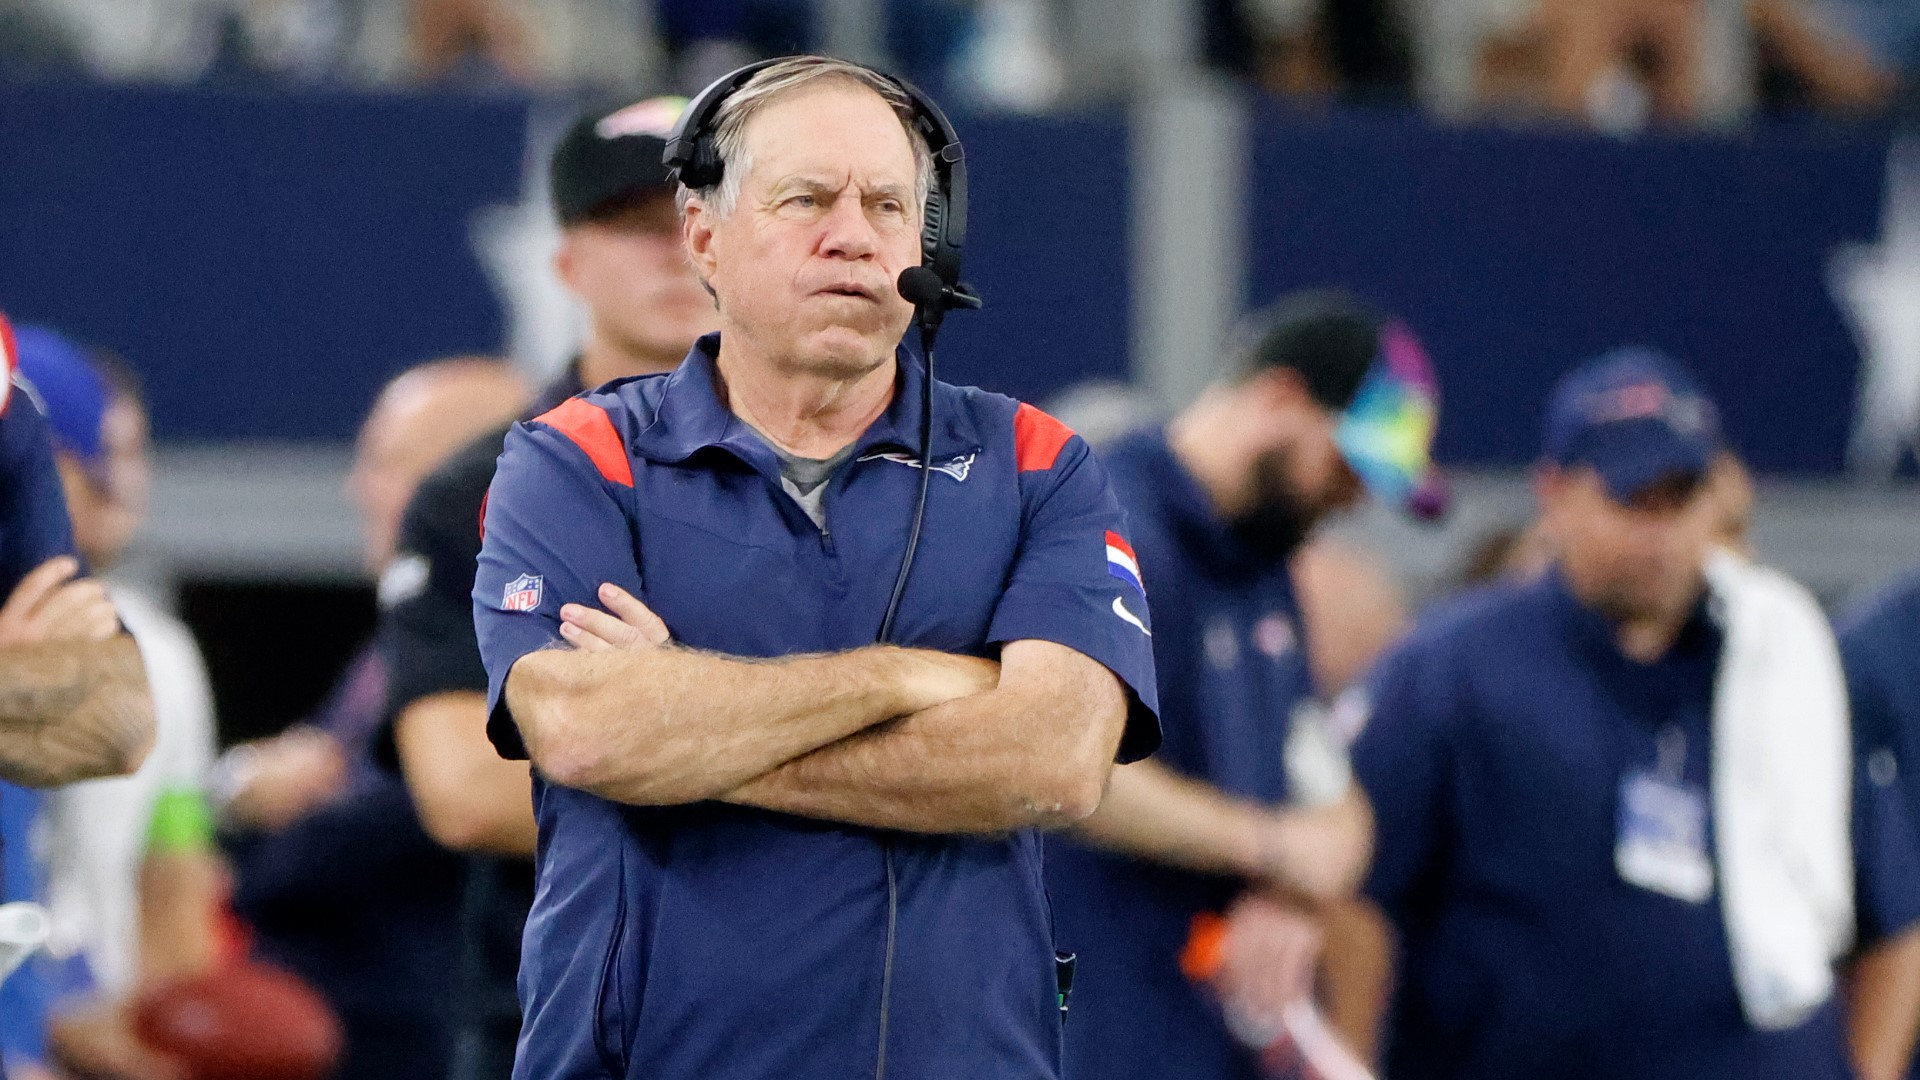 Belichick, 71, has been a coach in the NFL for 49 seasons.